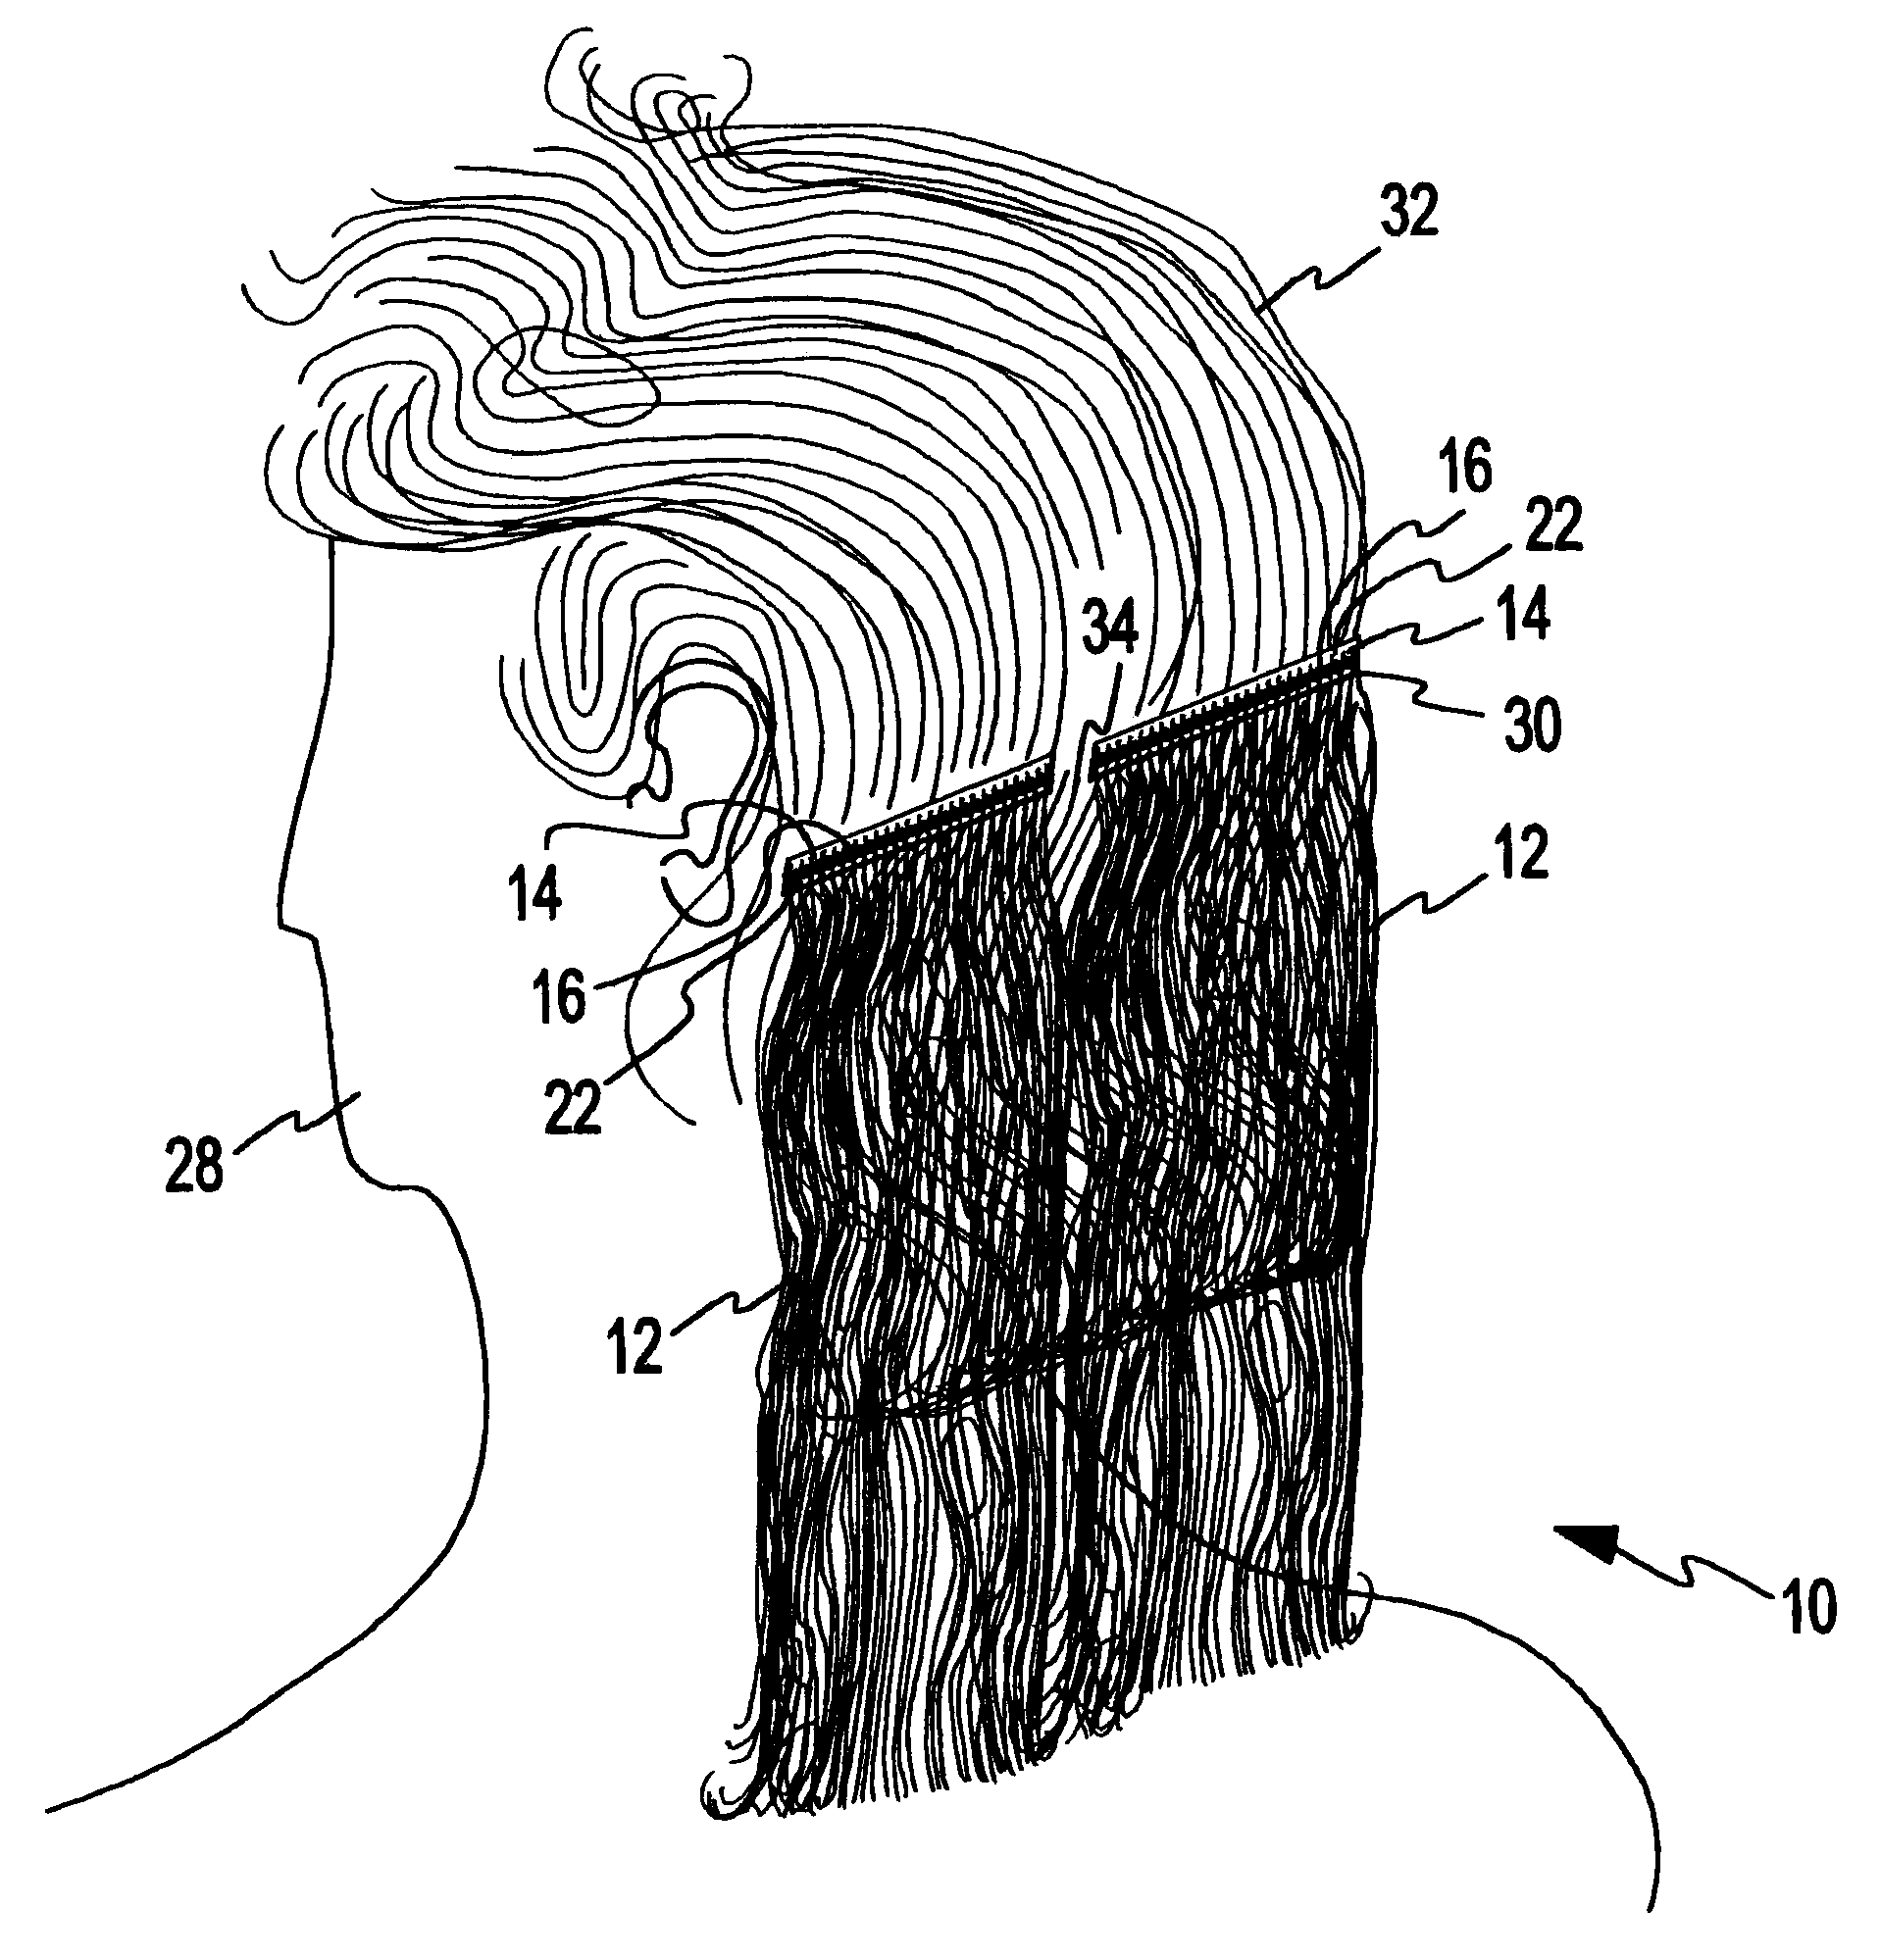 Method of using a self adhesive hair extension